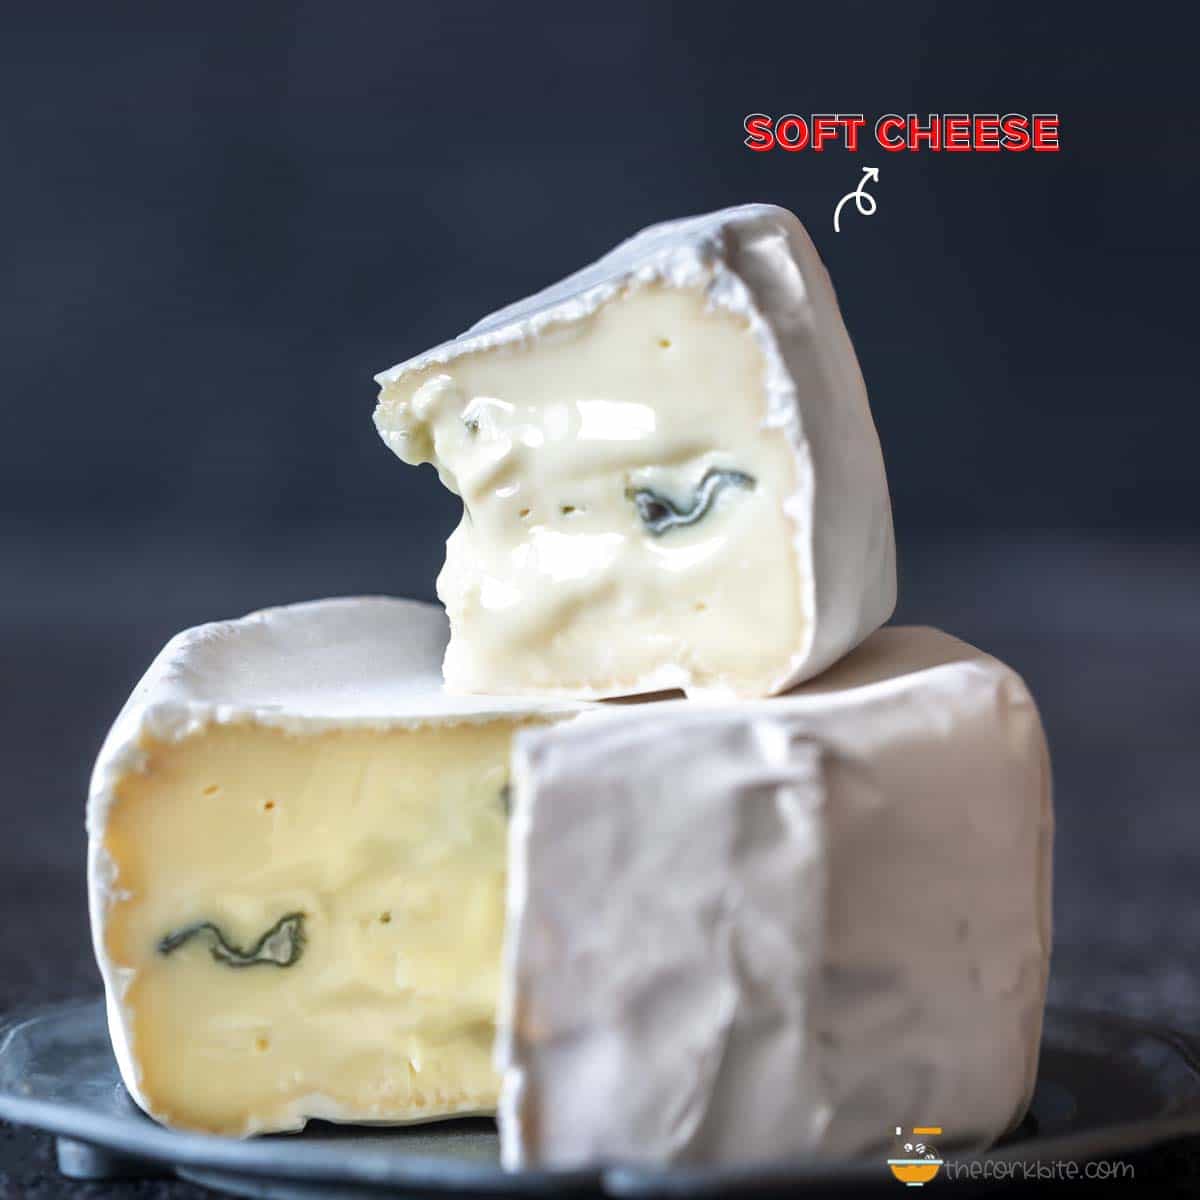 When cheese is left out of the refrigerator, after a short while, it will begin oiling off. When it looks as if it’s glistening, that is the time to either put it straight back in the fridge or throw it away.